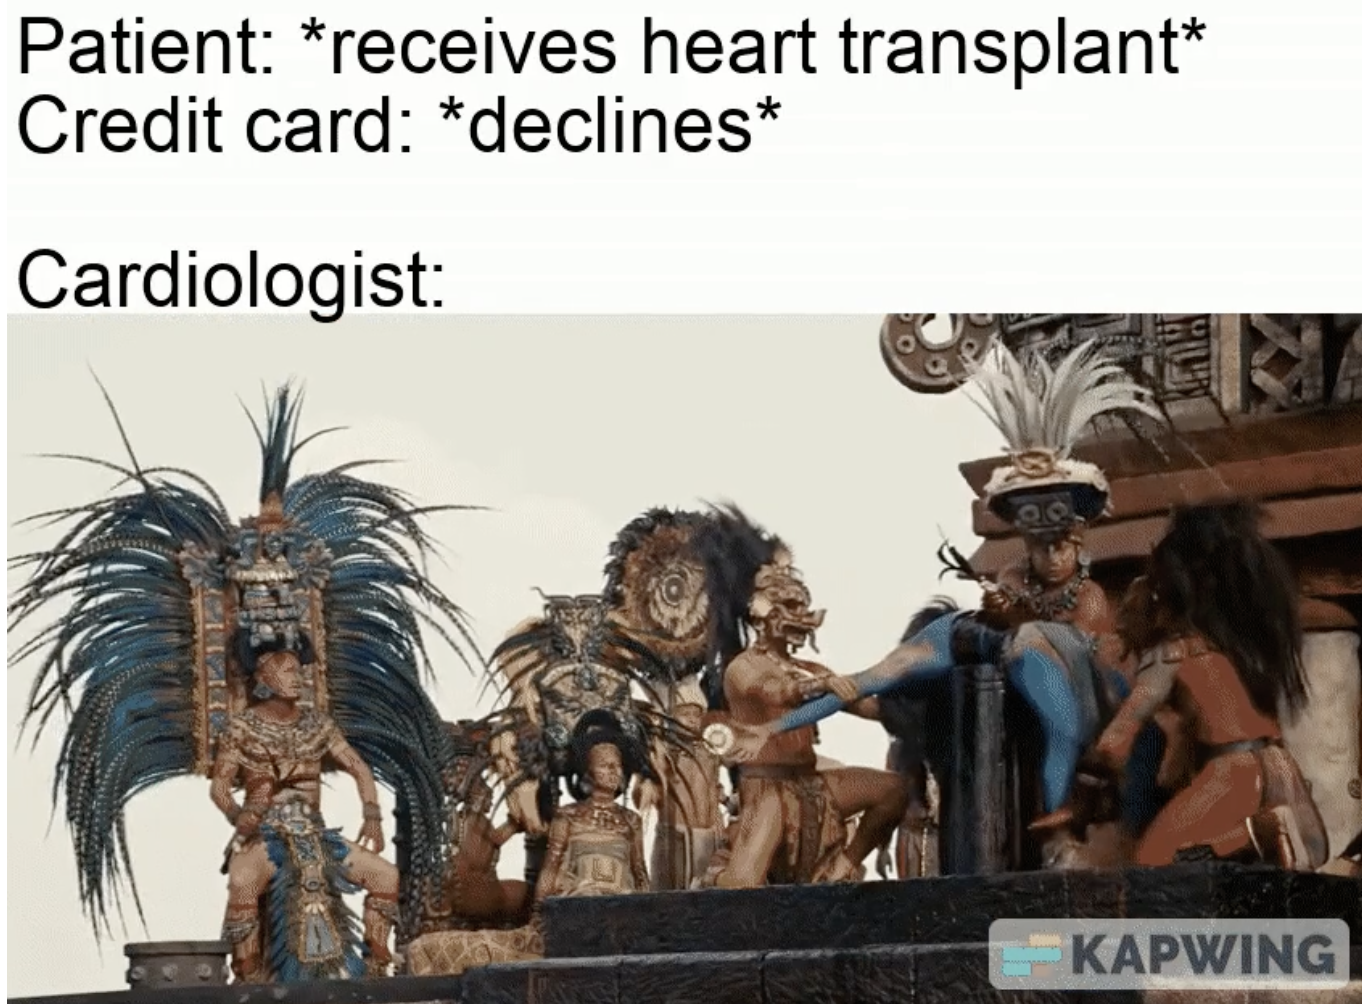 photo caption - Patient receives heart transplant Credit card declines Cardiologist Kfith Kapwing